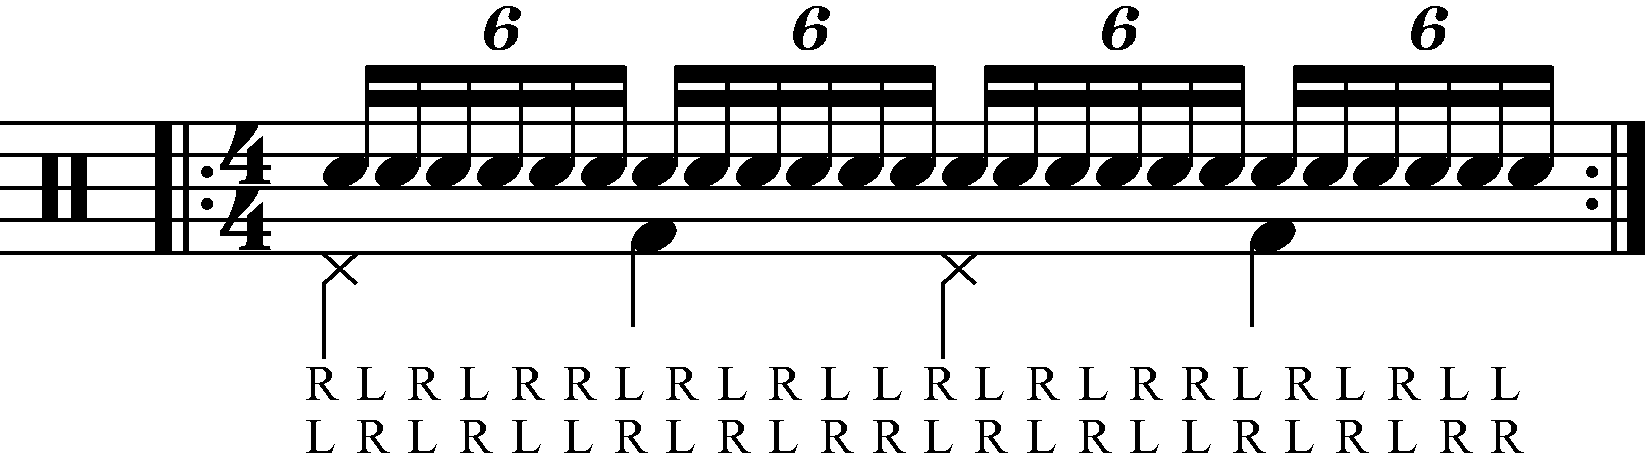 Adding quarter note feet under a double paradiddle